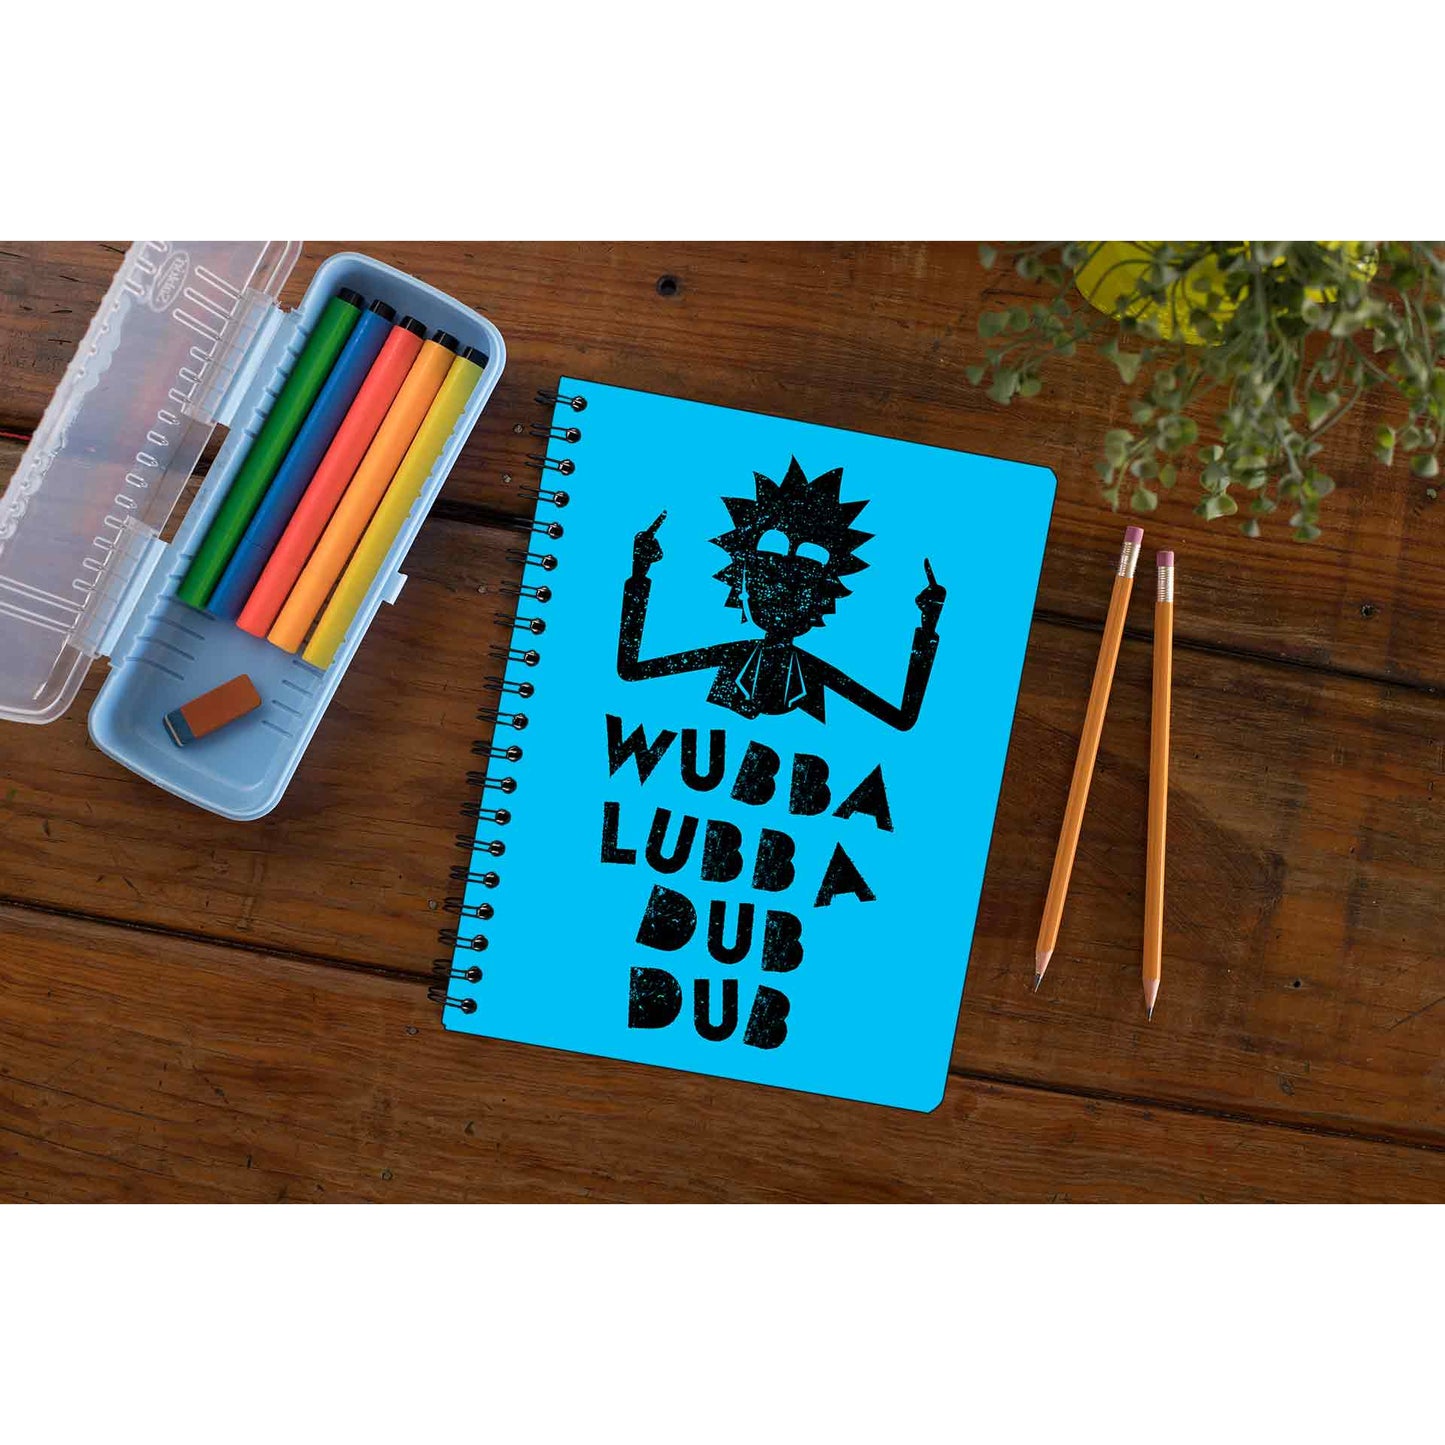 rick and morty wubba lubba dub dub notebook notepad diary buy online india the banyan tee tbt unruled rick and morty online summer beth mr meeseeks jerry quote vector art clothing accessories merchandise